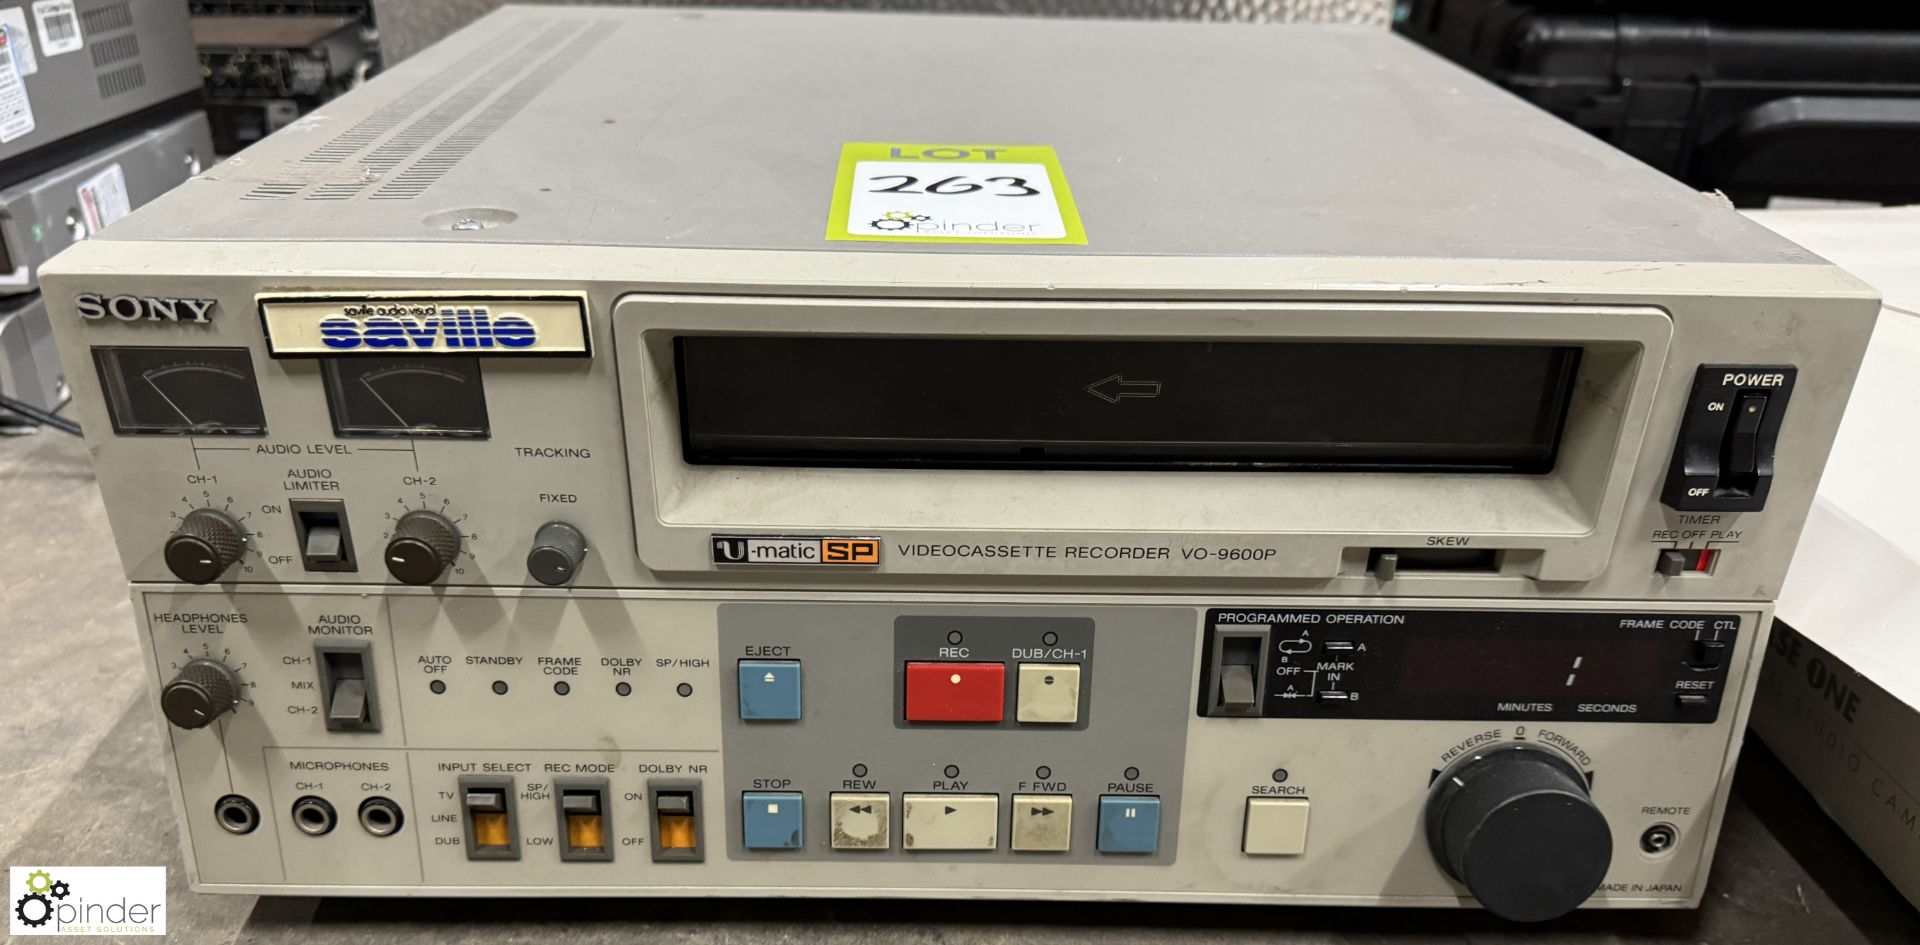 Sony VO-9600 P Videocassette Recorder - Image 2 of 4